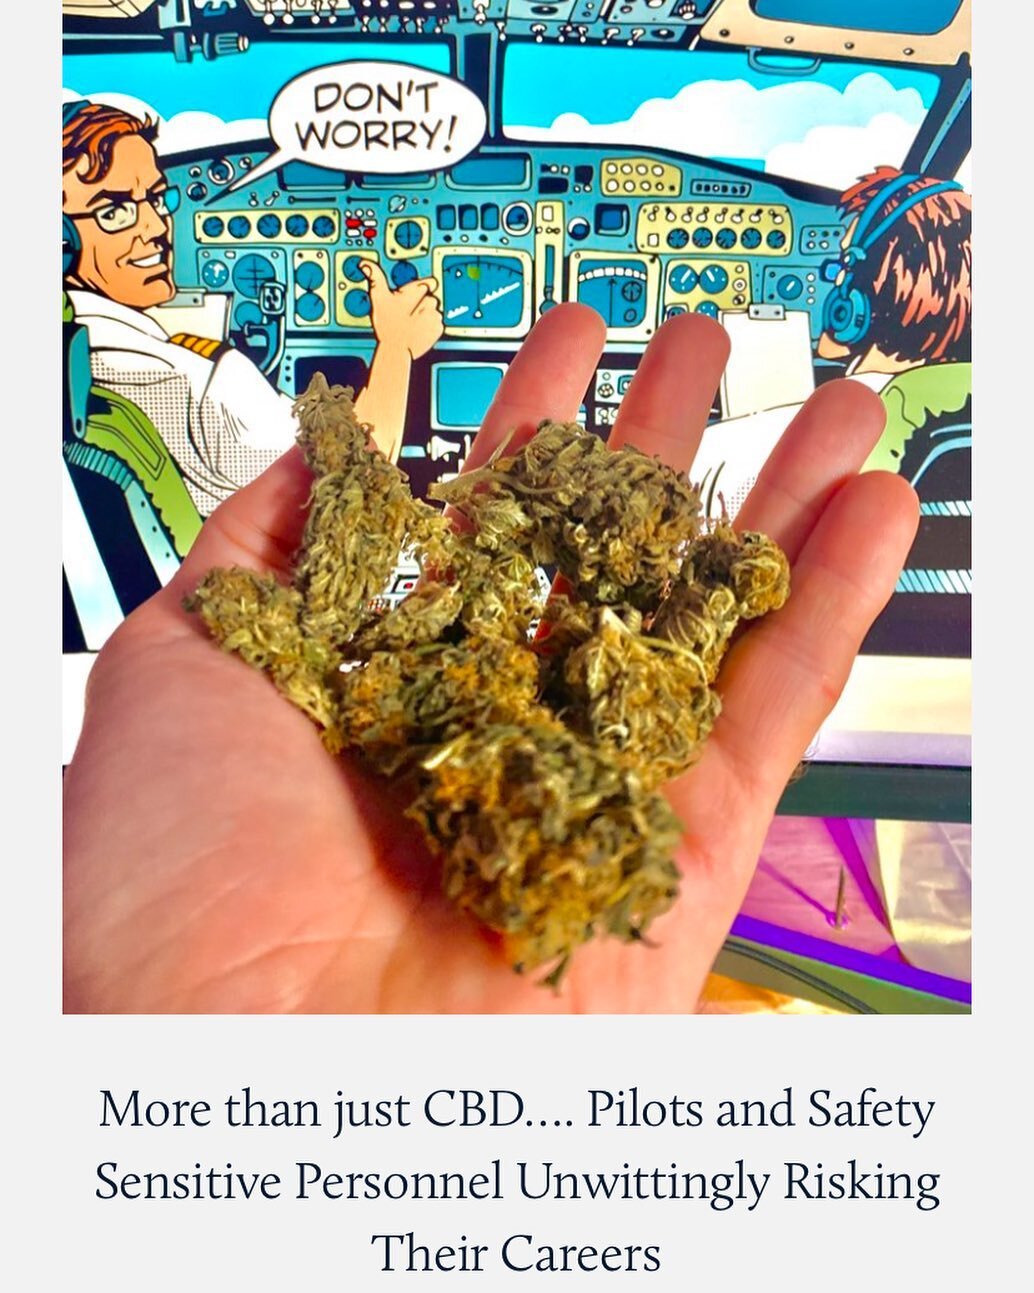 https://www.avialex.com/aviation-news/2021/12/16/more-than-just-cbd-pilots-and-safety-sensitive-personnel-unwittingly-risking-their-careers